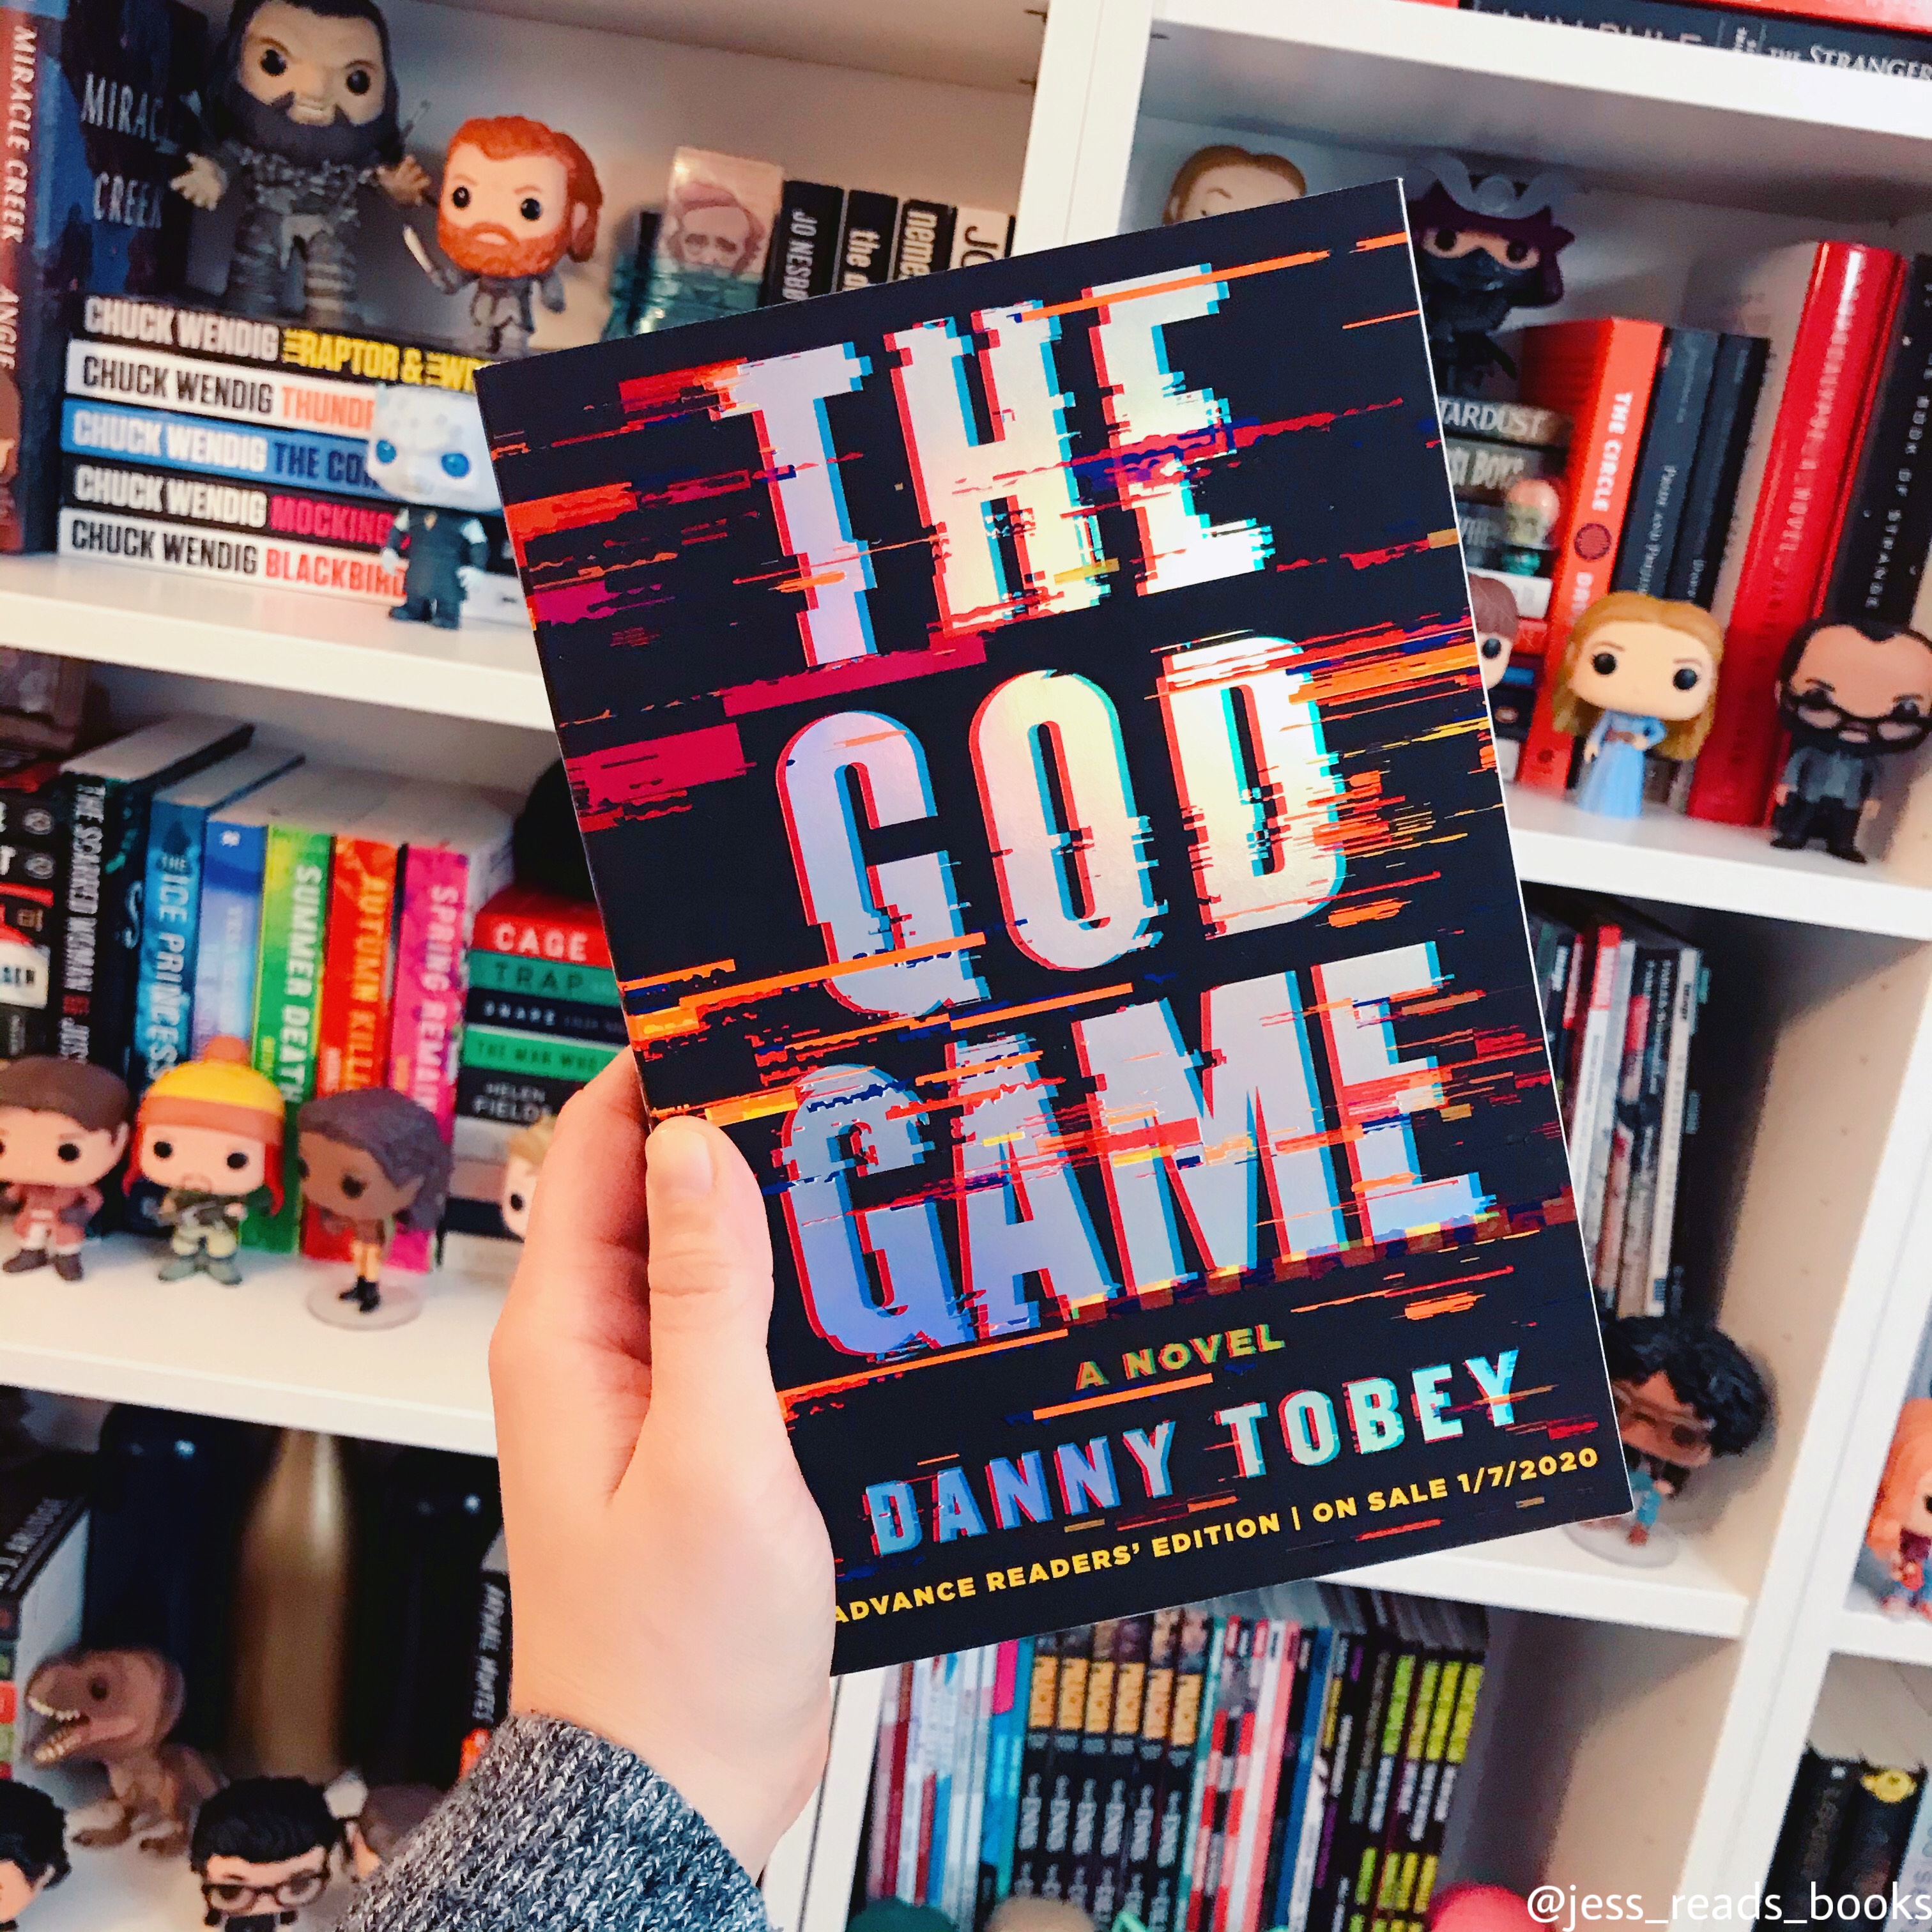 Get Books The god game danny tobey For Free